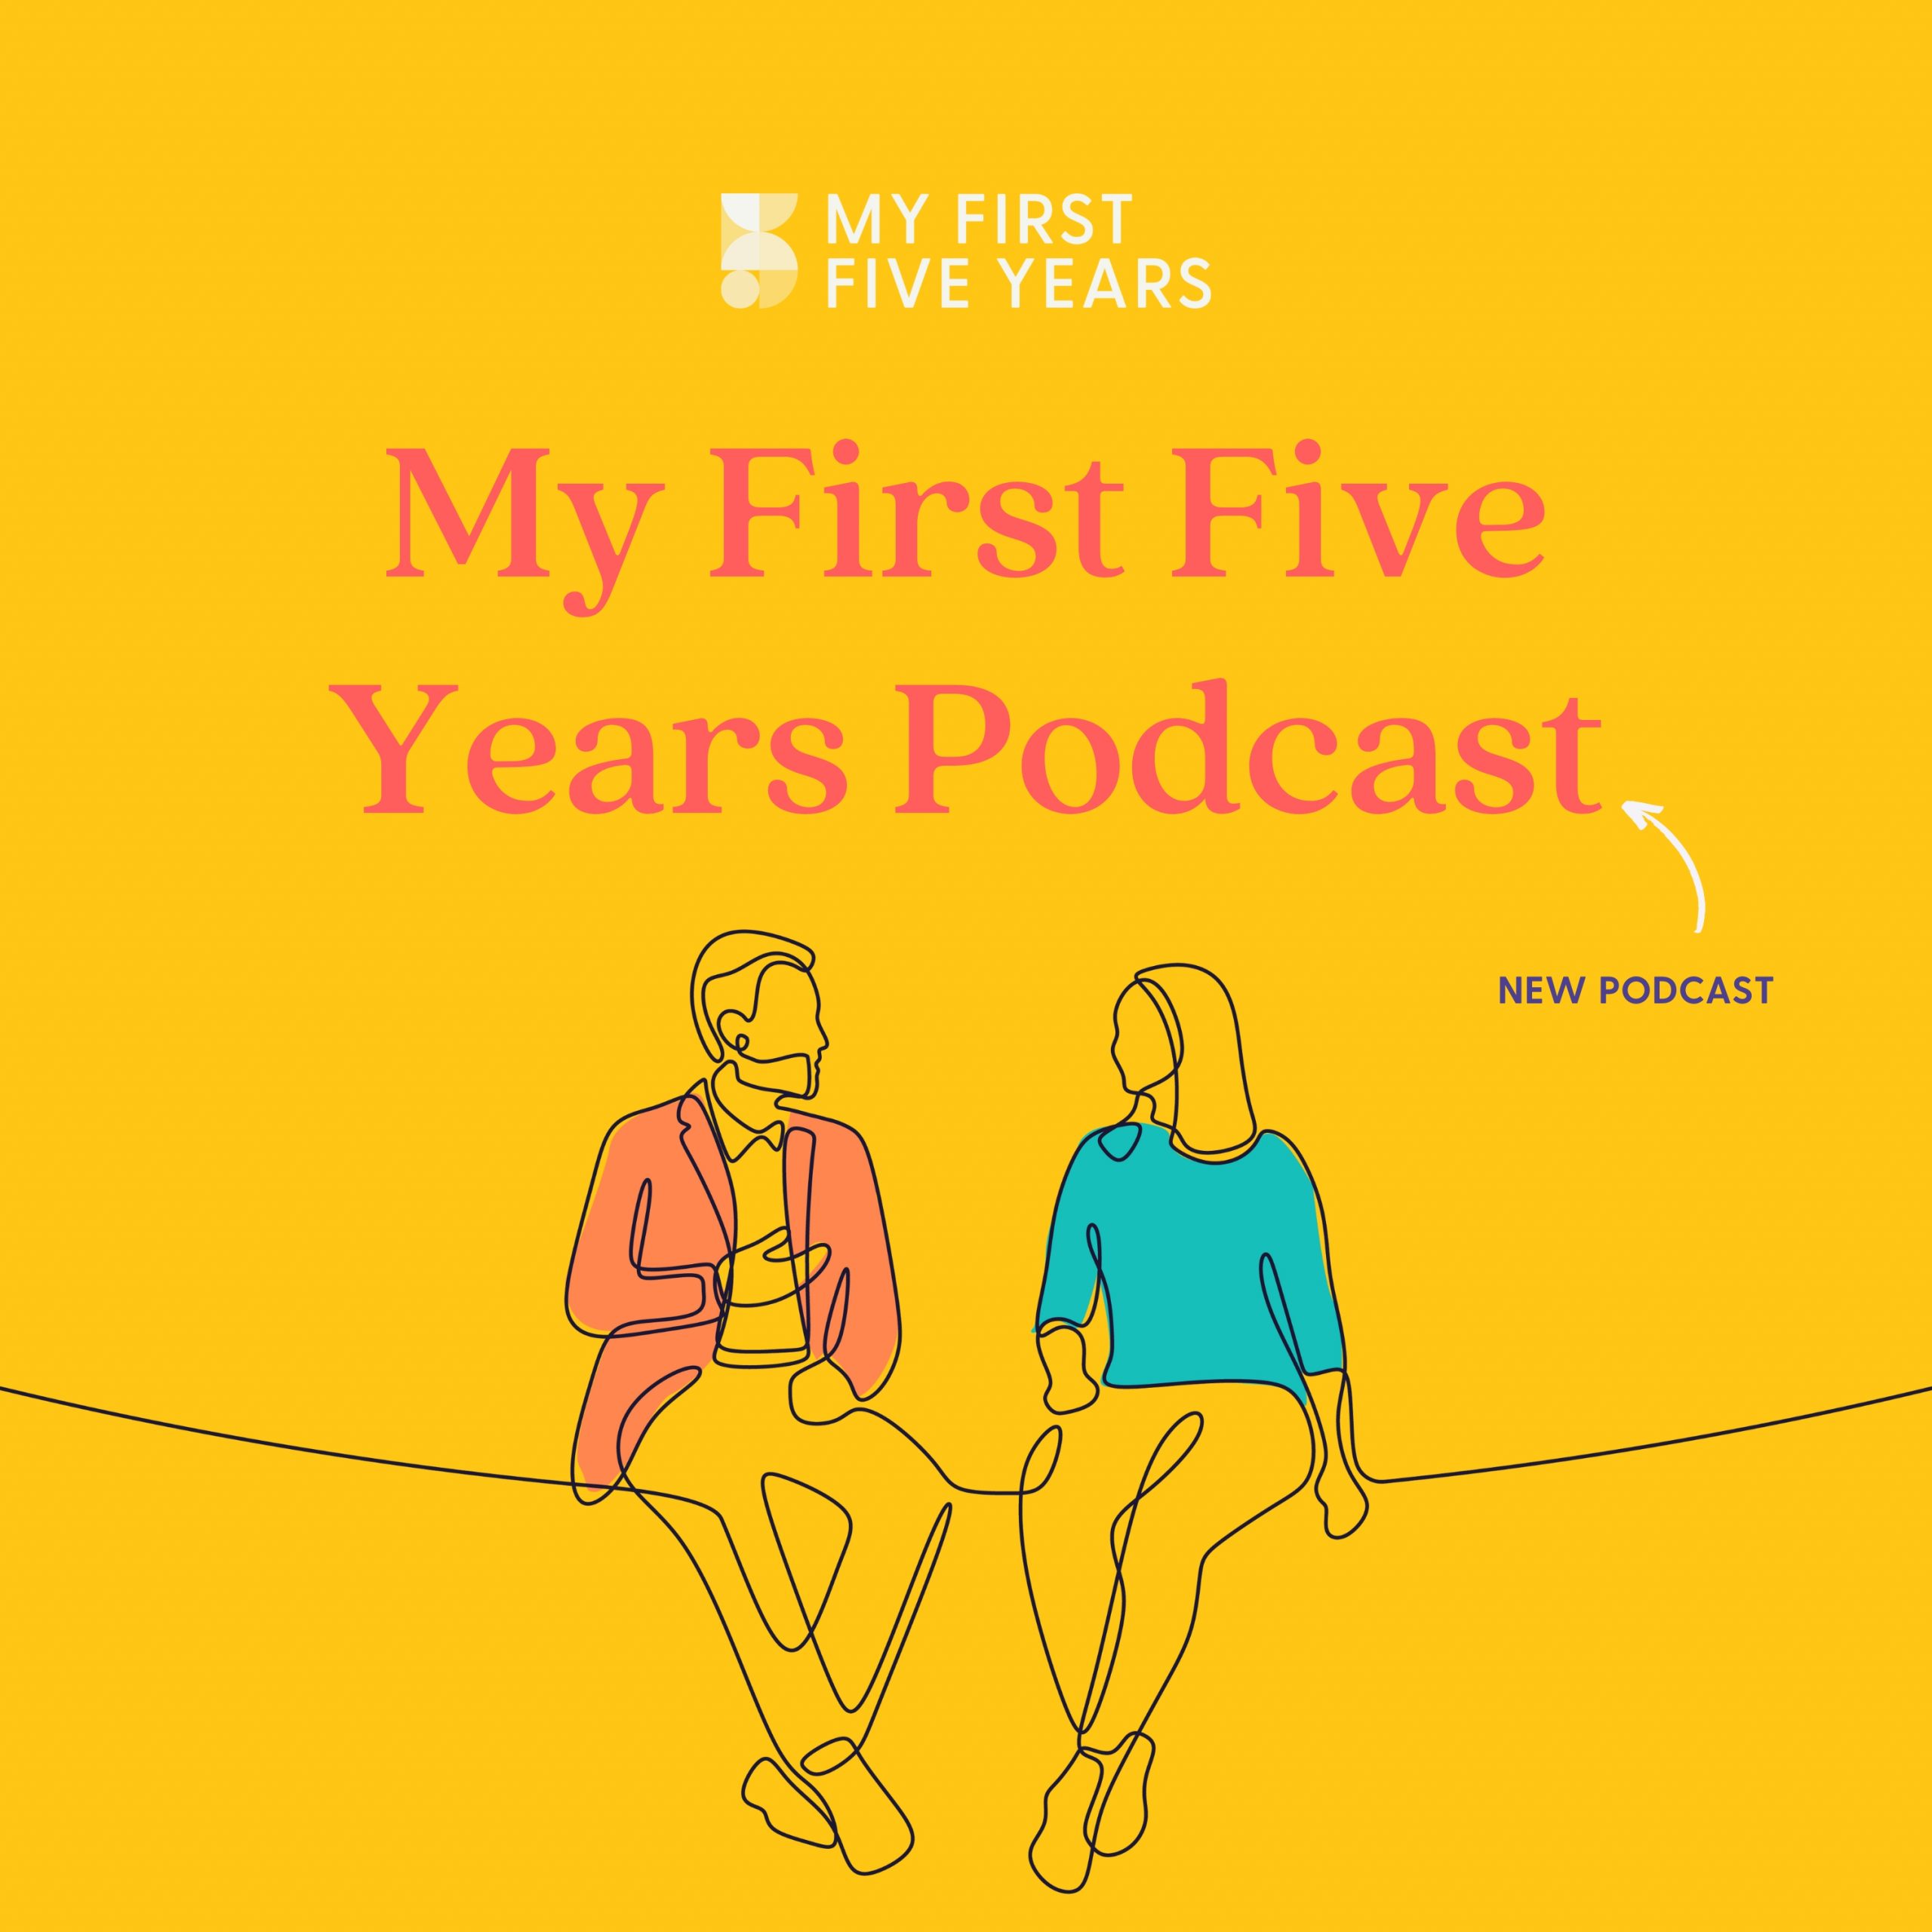 My First Five Years Podcast Image